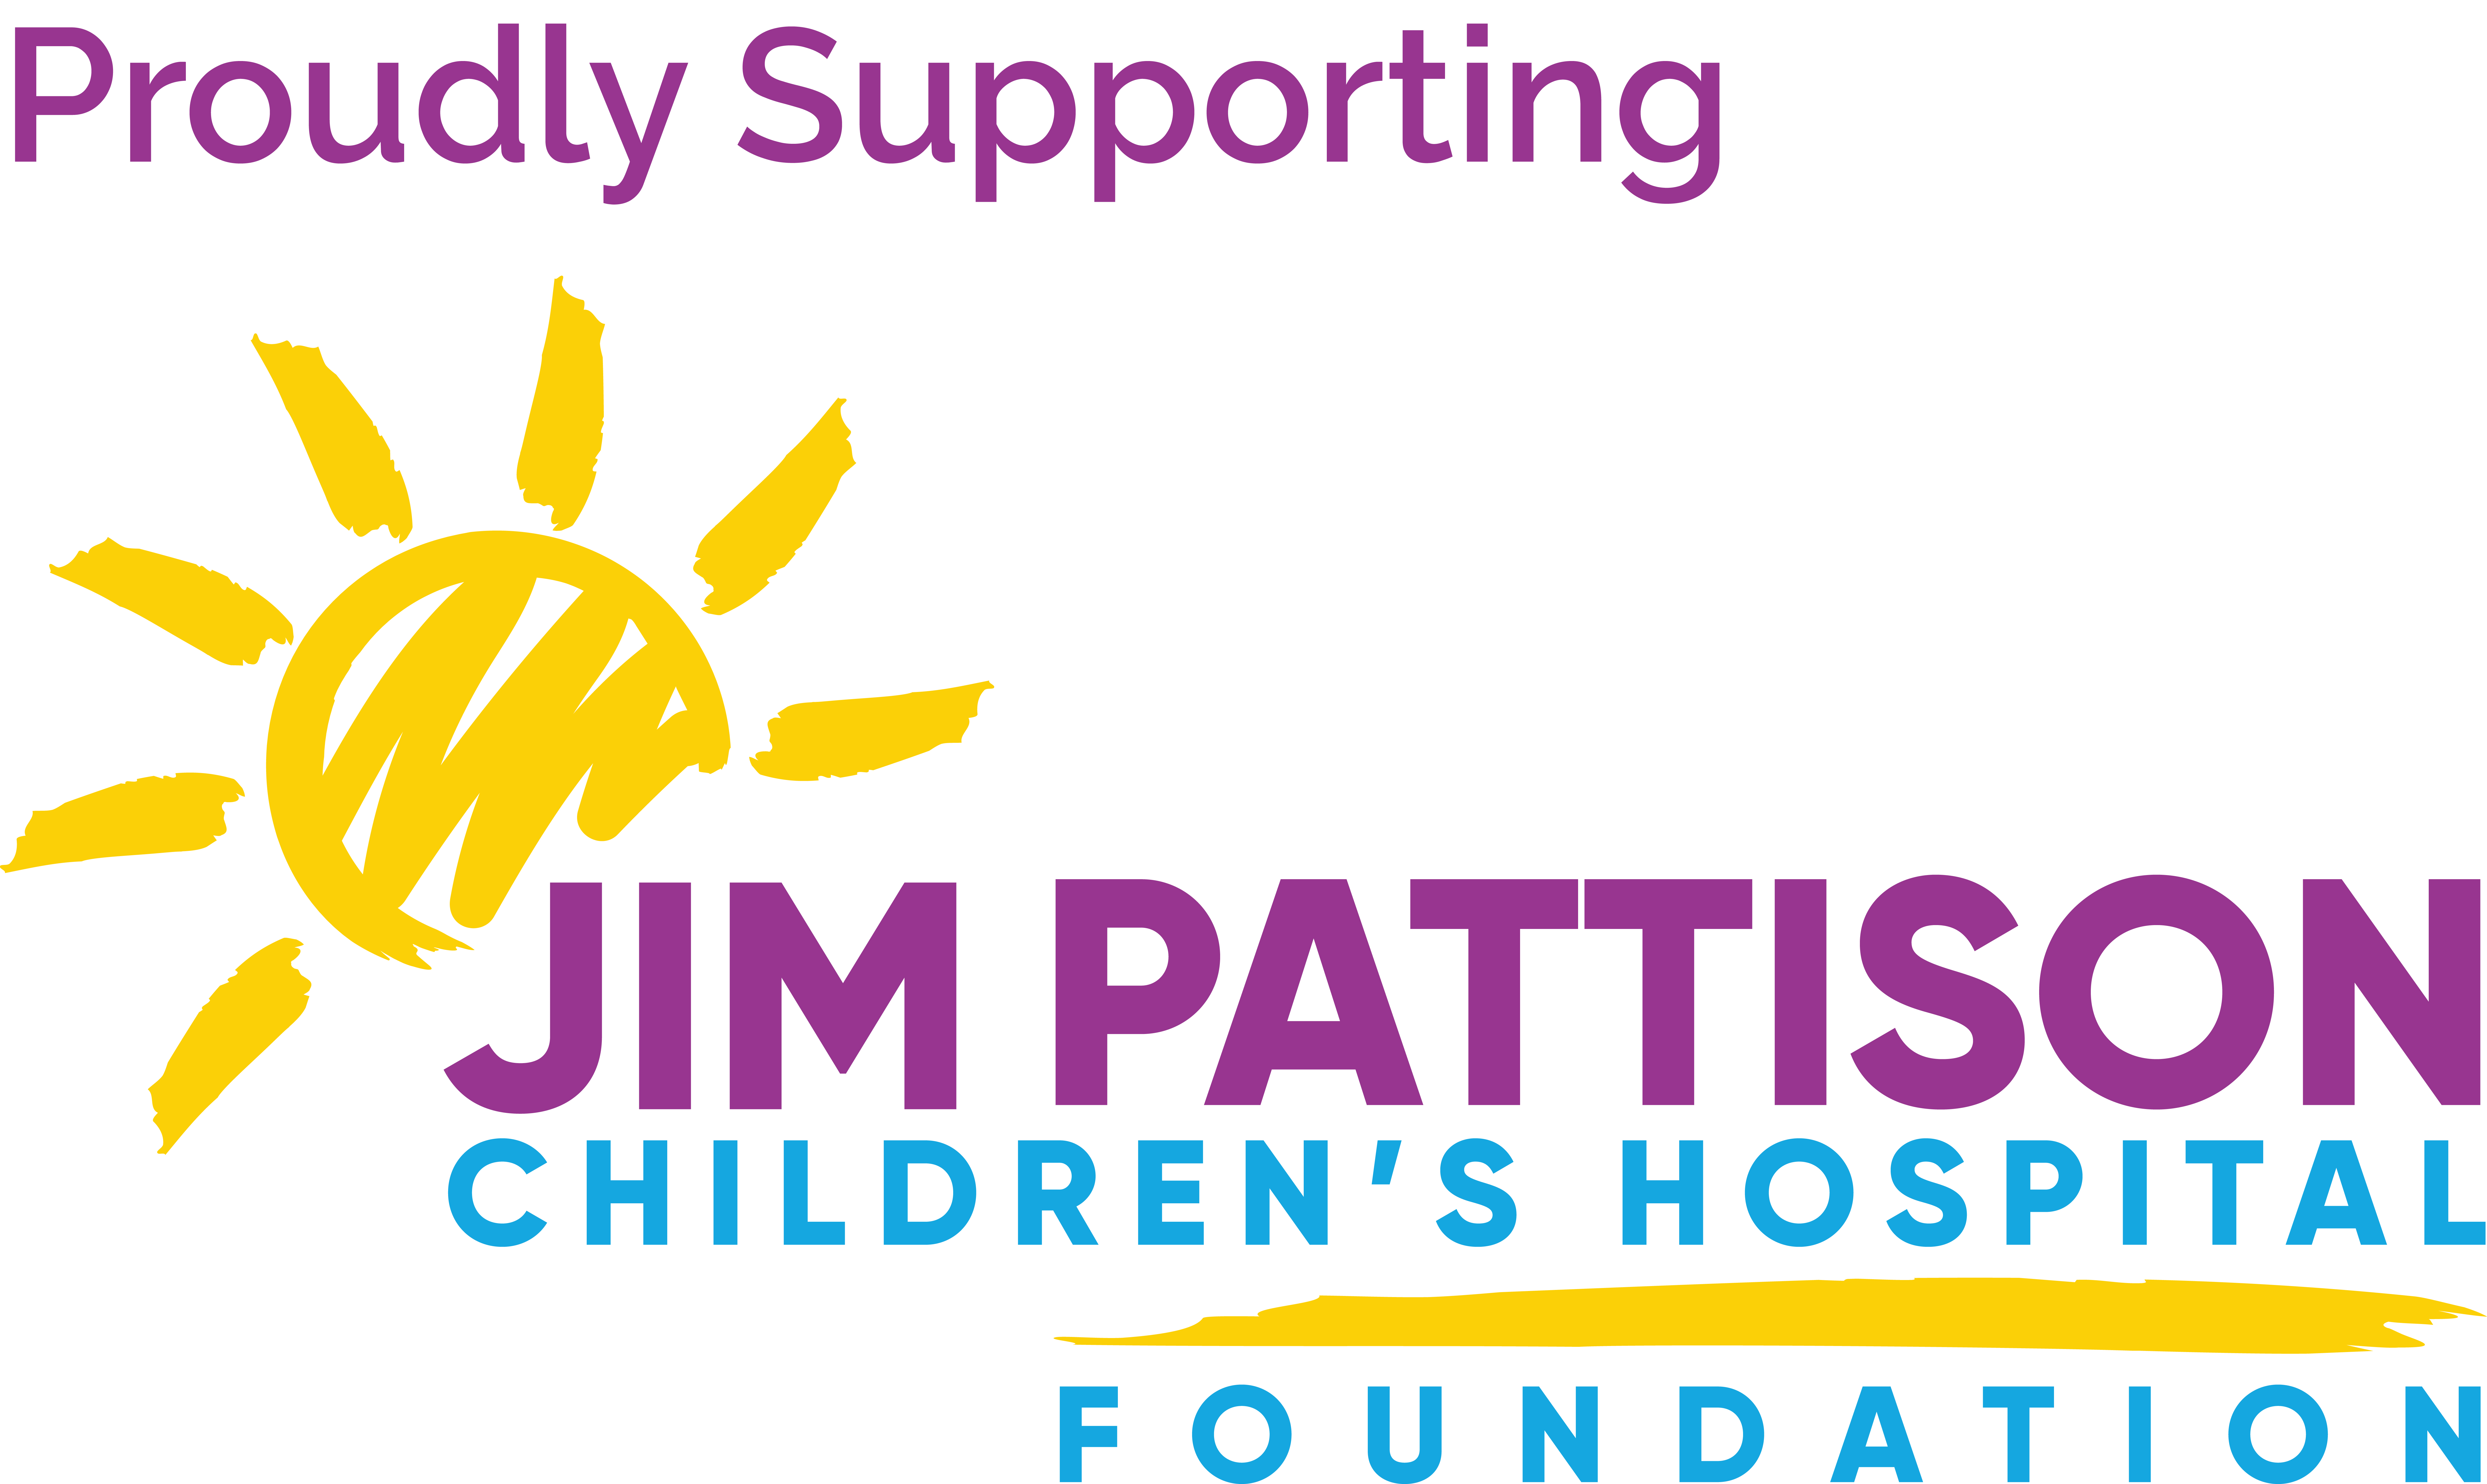 Proudly Supporting Jim Pattison Children's Hospital Foundation